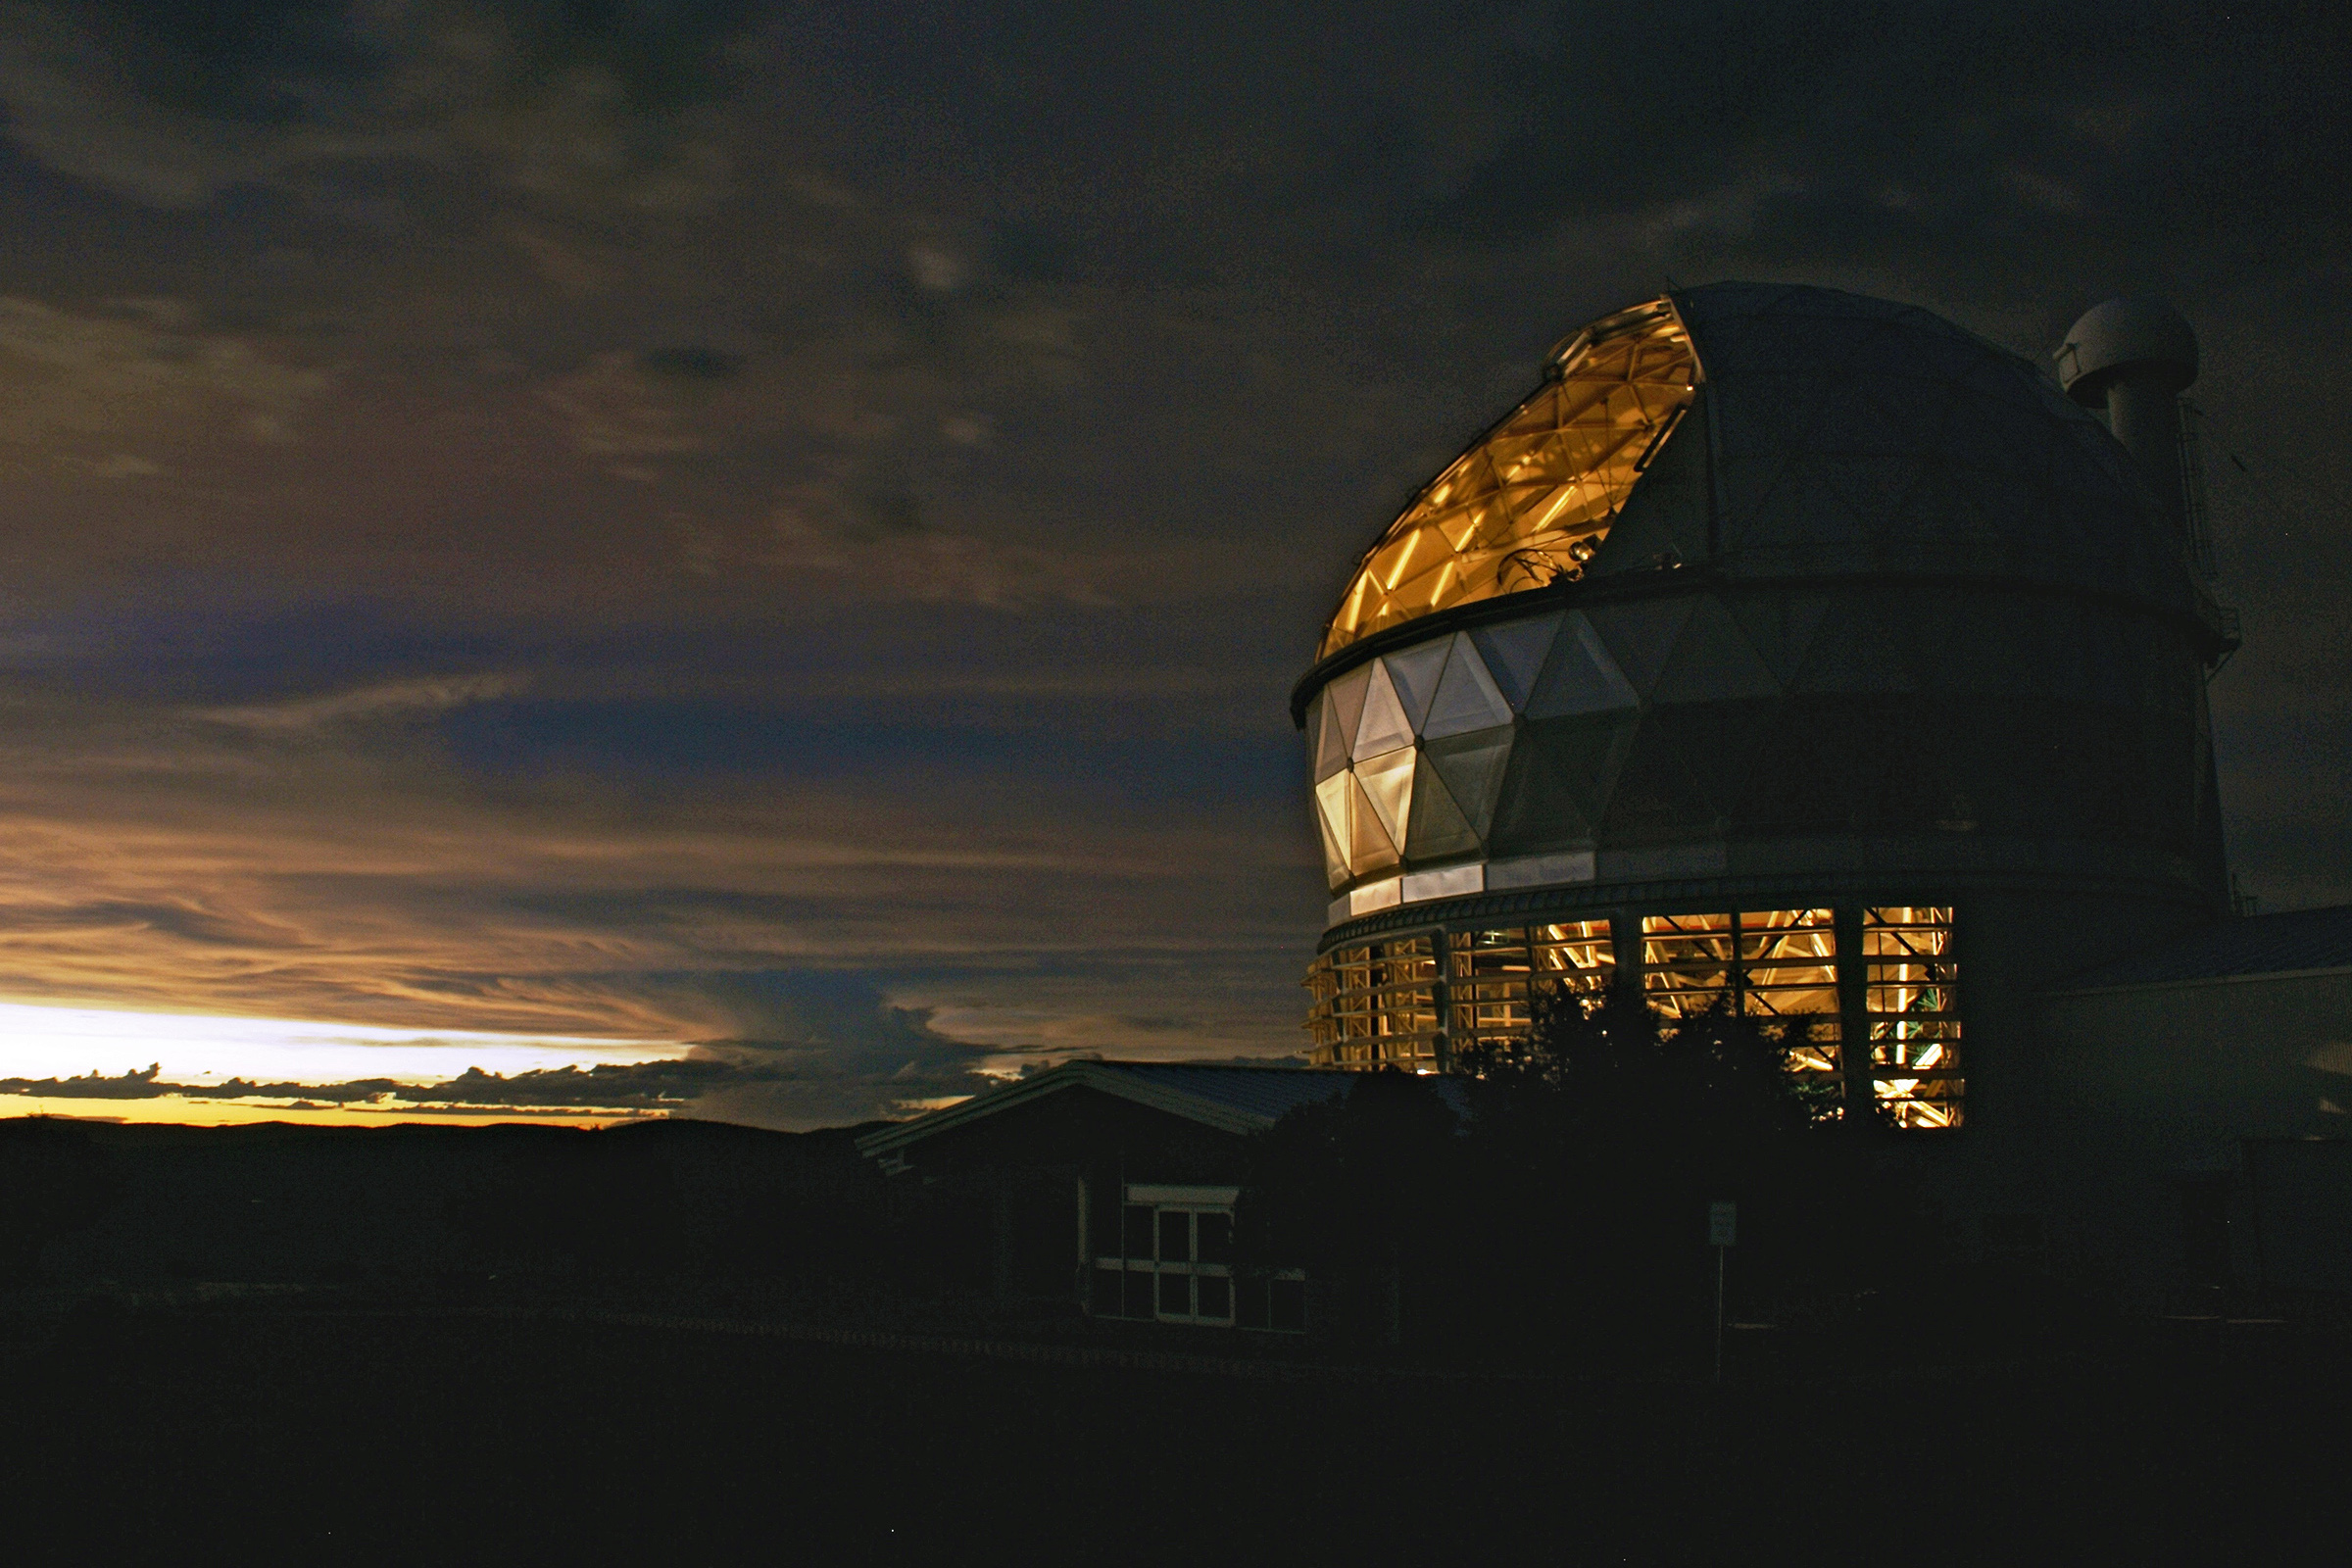 The Hobby-Eberly Telescope is lit from within at dusk as clouds loom in the background